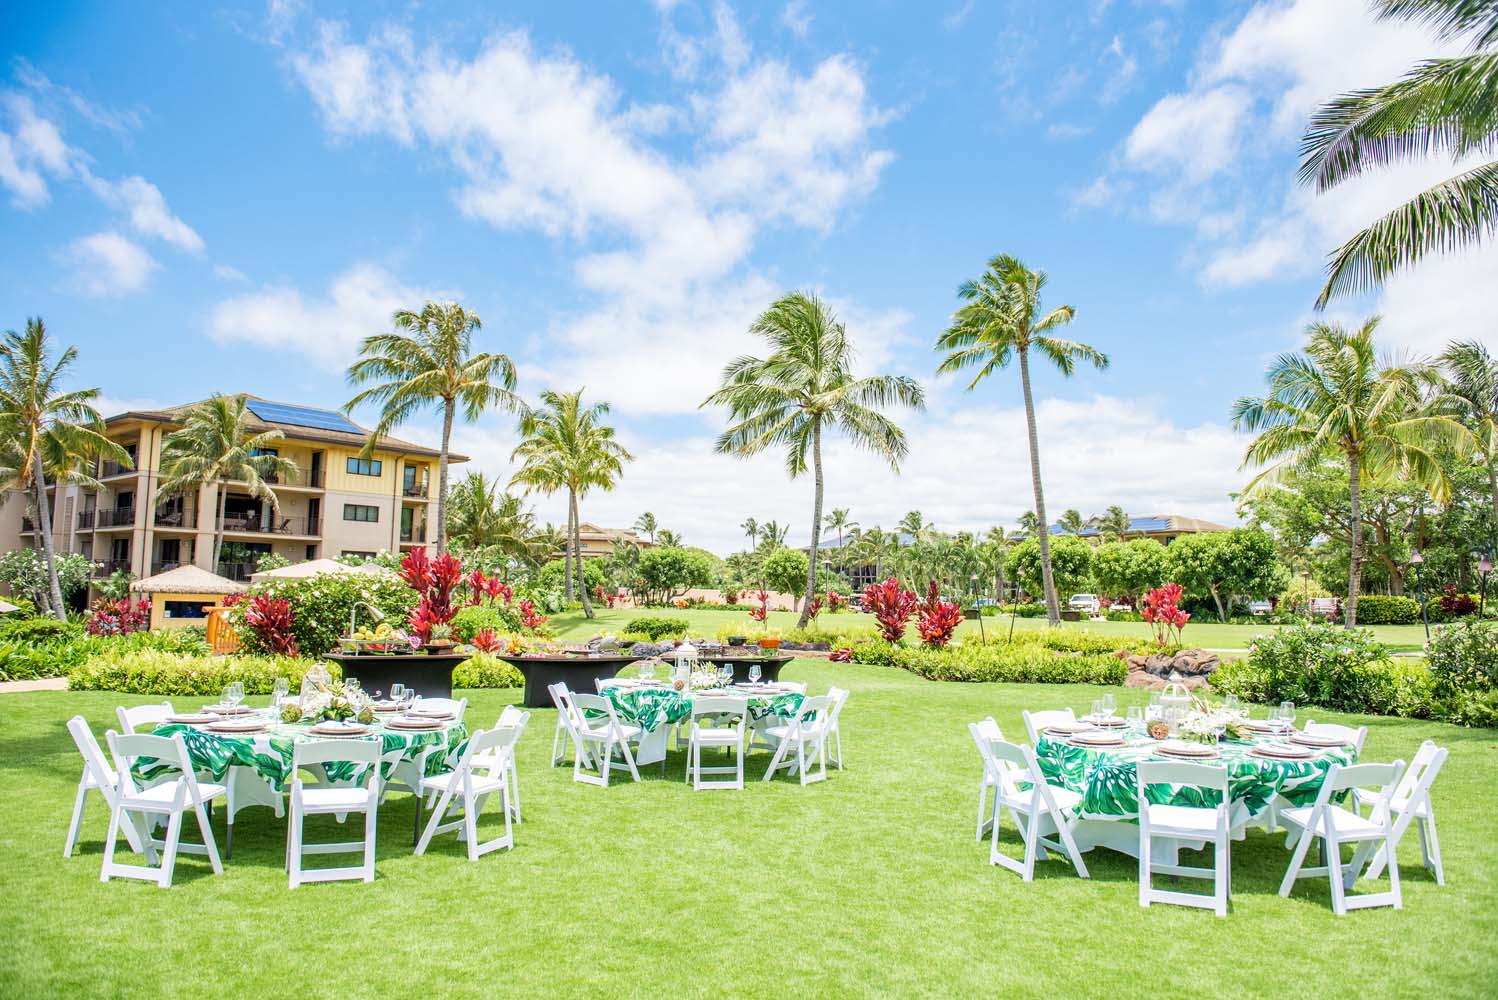 Beach reception on one of the best kauai wedding venues. Our beach house restaurant will provide food for your guests